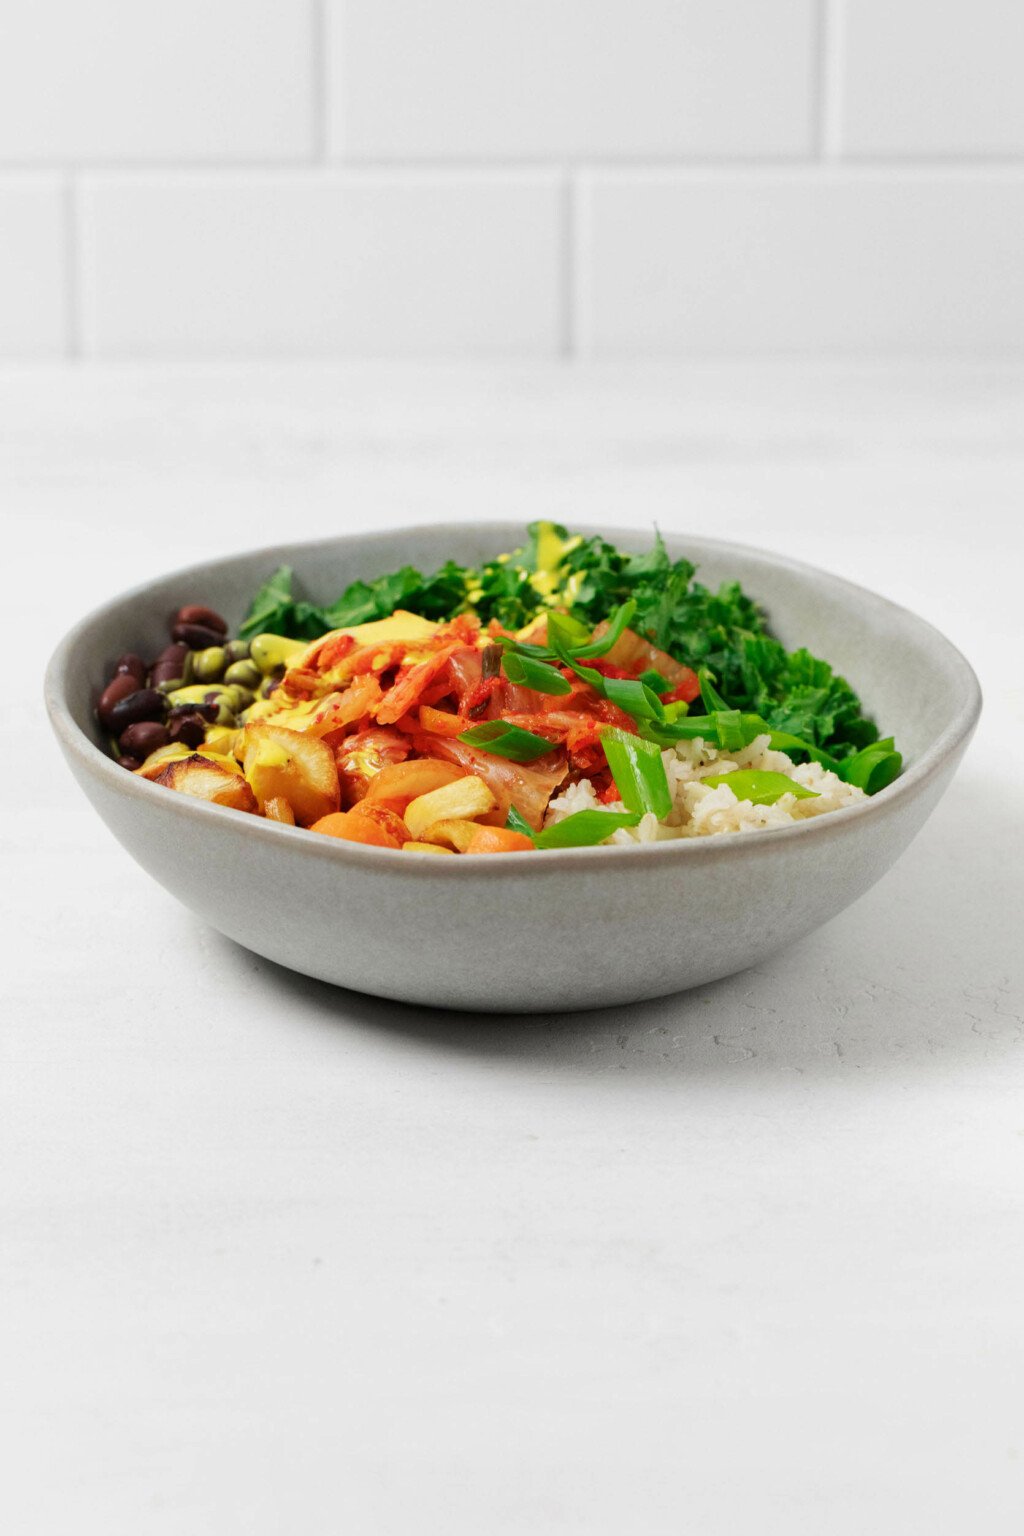 A gray bowl holds a mixture of whole grains, vegetables, beans, and a bright, yellow colored sauce. It's resting on a white surface with white tiles in the background.